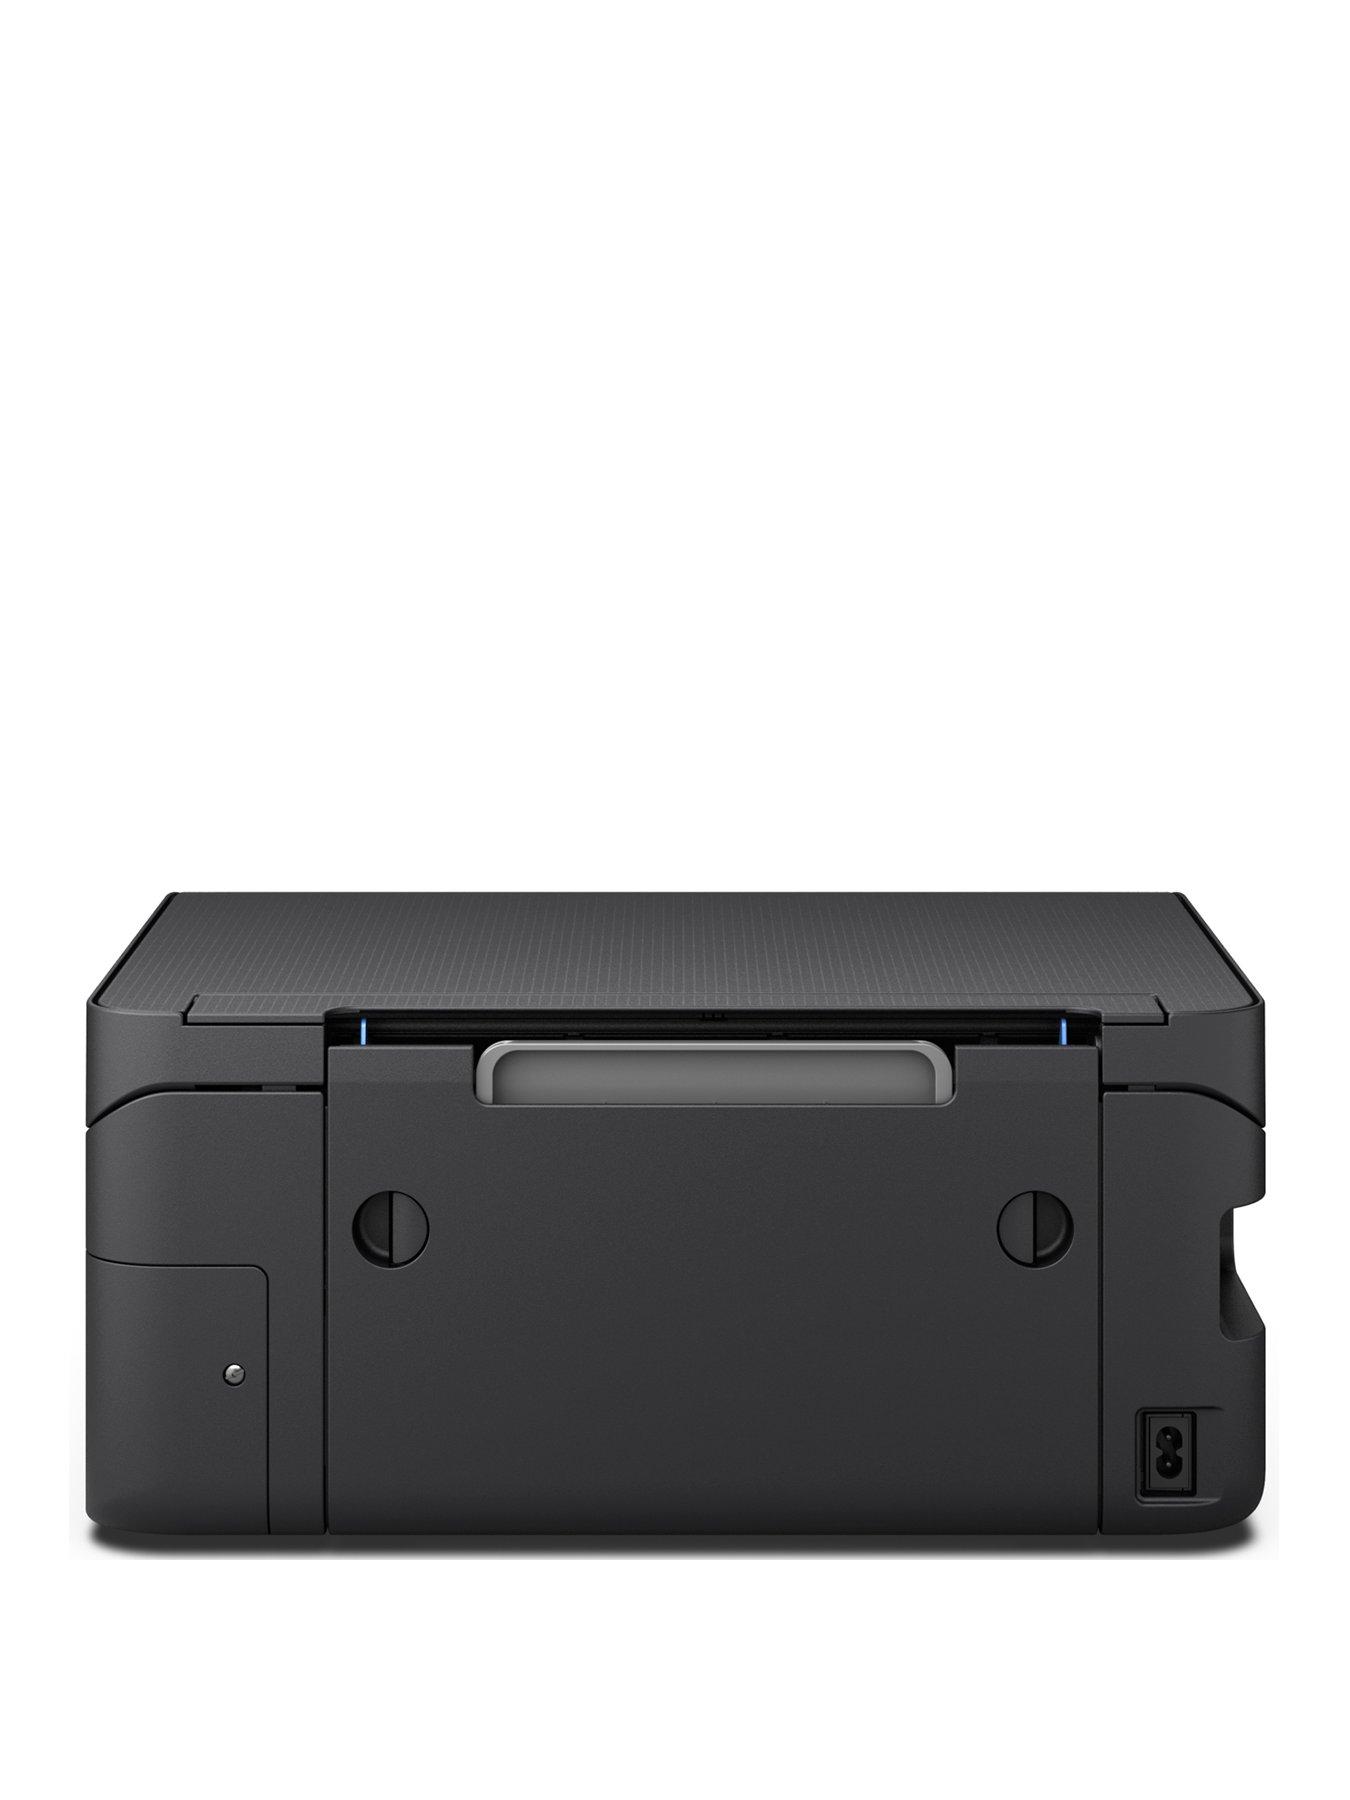 Epson Expression Home XP-4200 Wireless Color Inkjet All-in-One Printer with  Scan and Copy